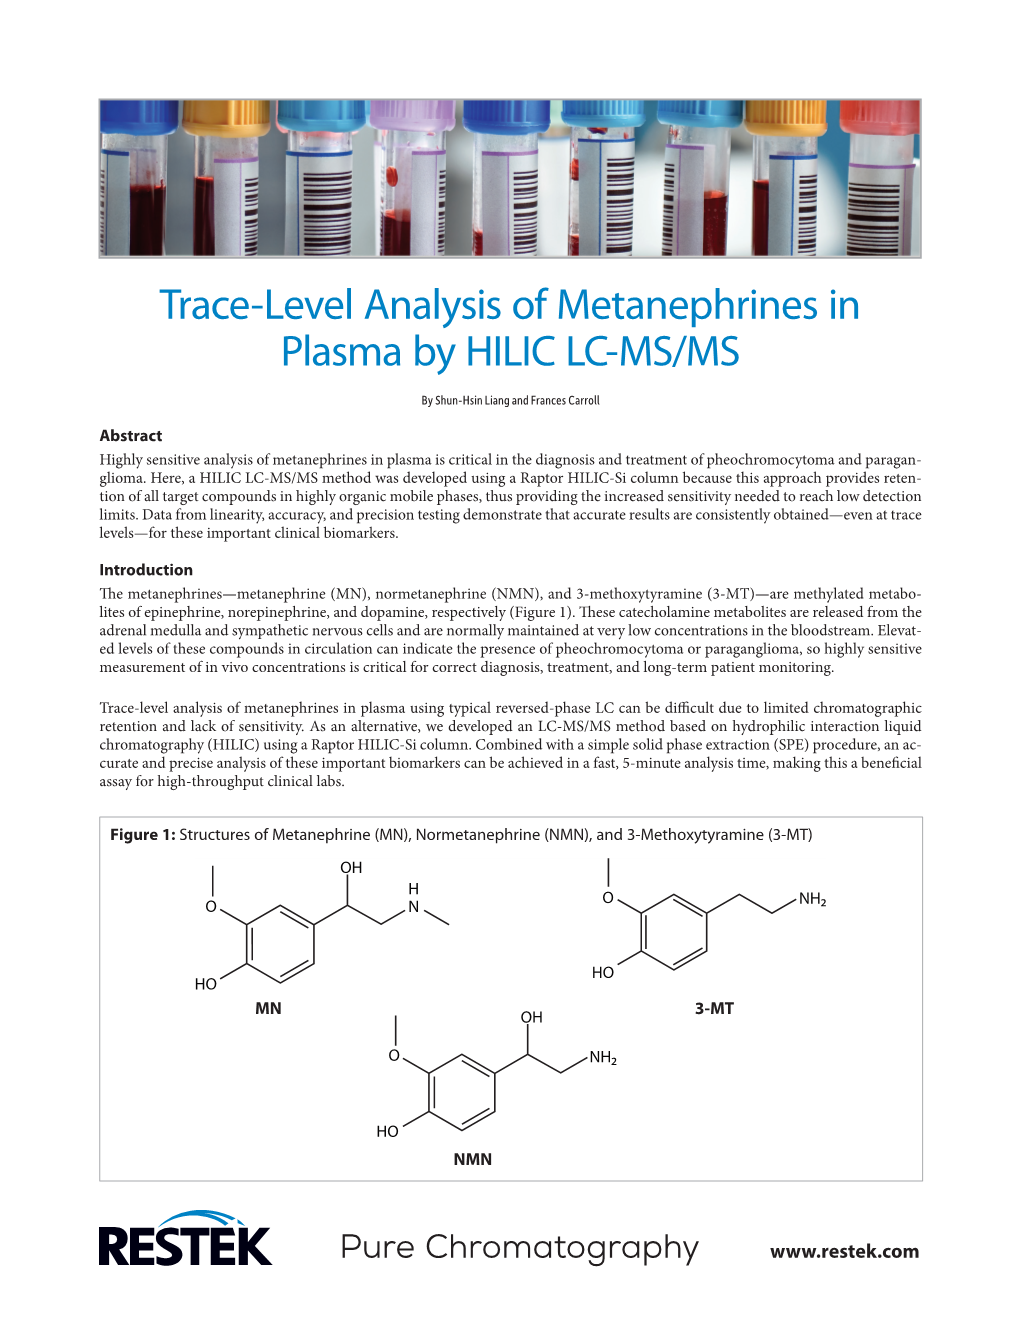 Trace-Level Analysis of Metanephrines in Plasma by HILIC LC-MS/MS